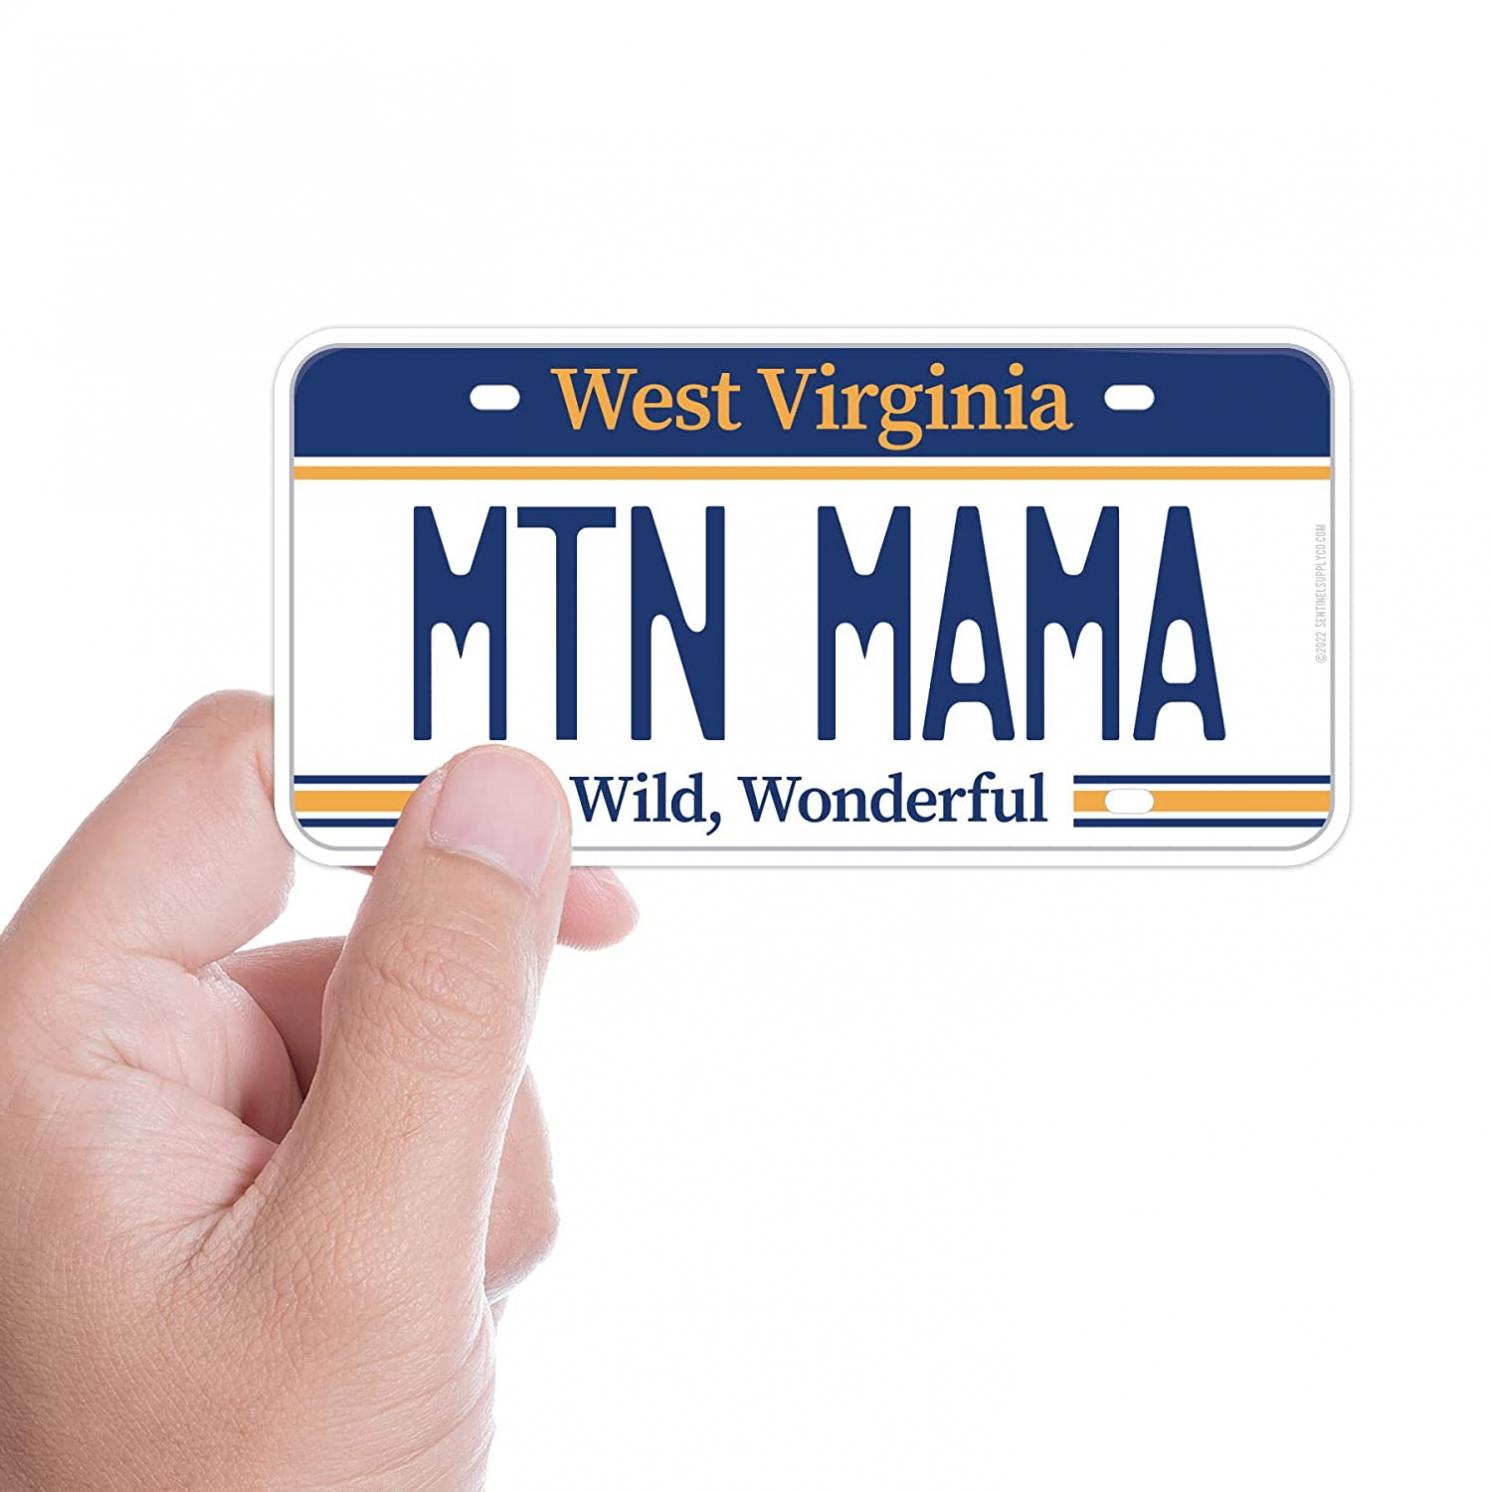 Mountain Mama Sticker, West Virginia Bumper Sticker for Car, Country Roads WV License Plate Decal for Hydroflask & Laptop, Country Music Quote